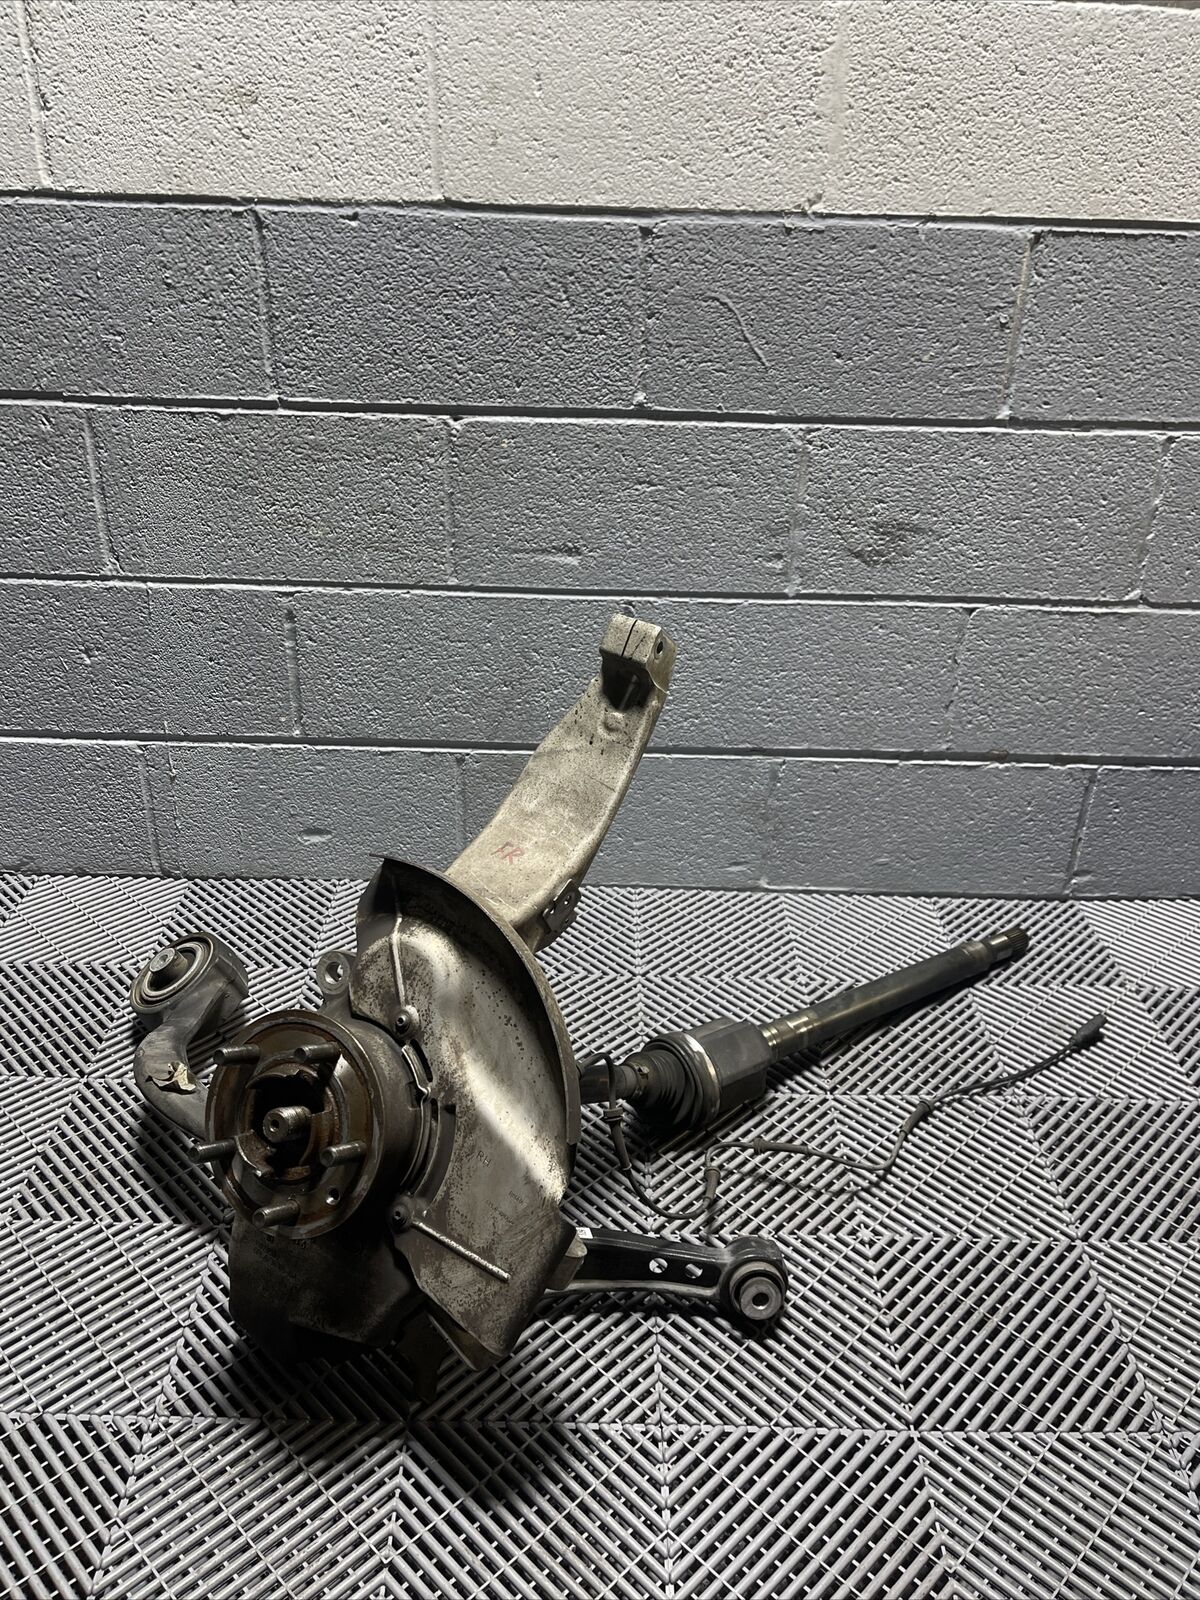 🚘 2014 - 2016 Range Rover Right Front Suspension Spindle Knuckle Axle OEM 🟢